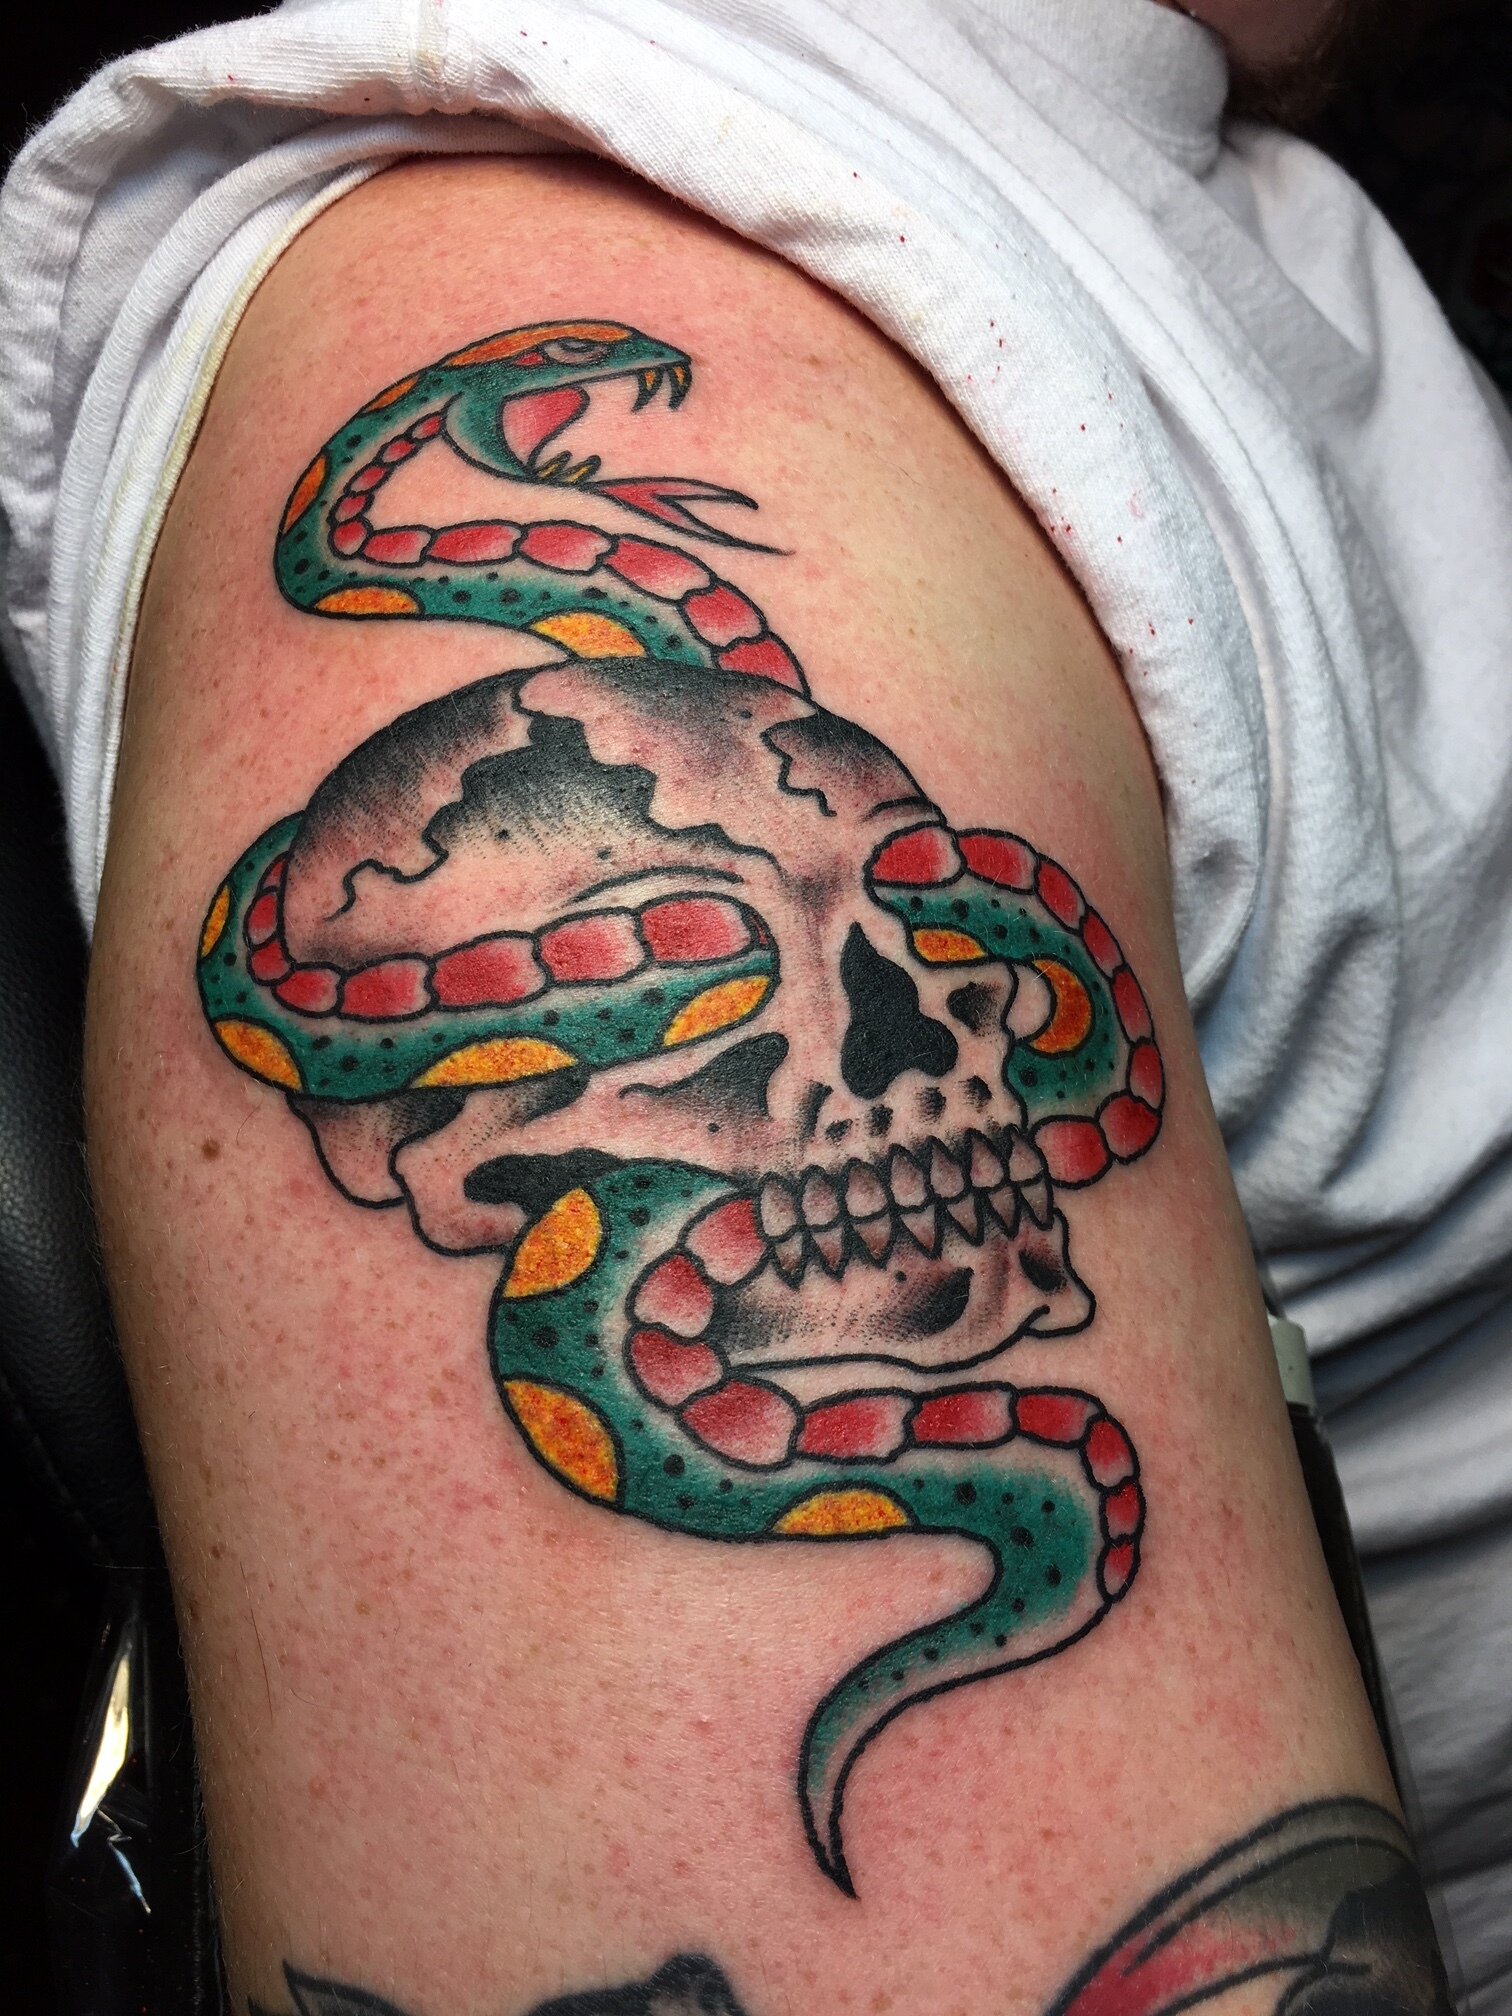 Traditional snake wrapping through skull tattoo in color by Brian Gattis at Southern Star Tattoo in Atlanta, Georgia